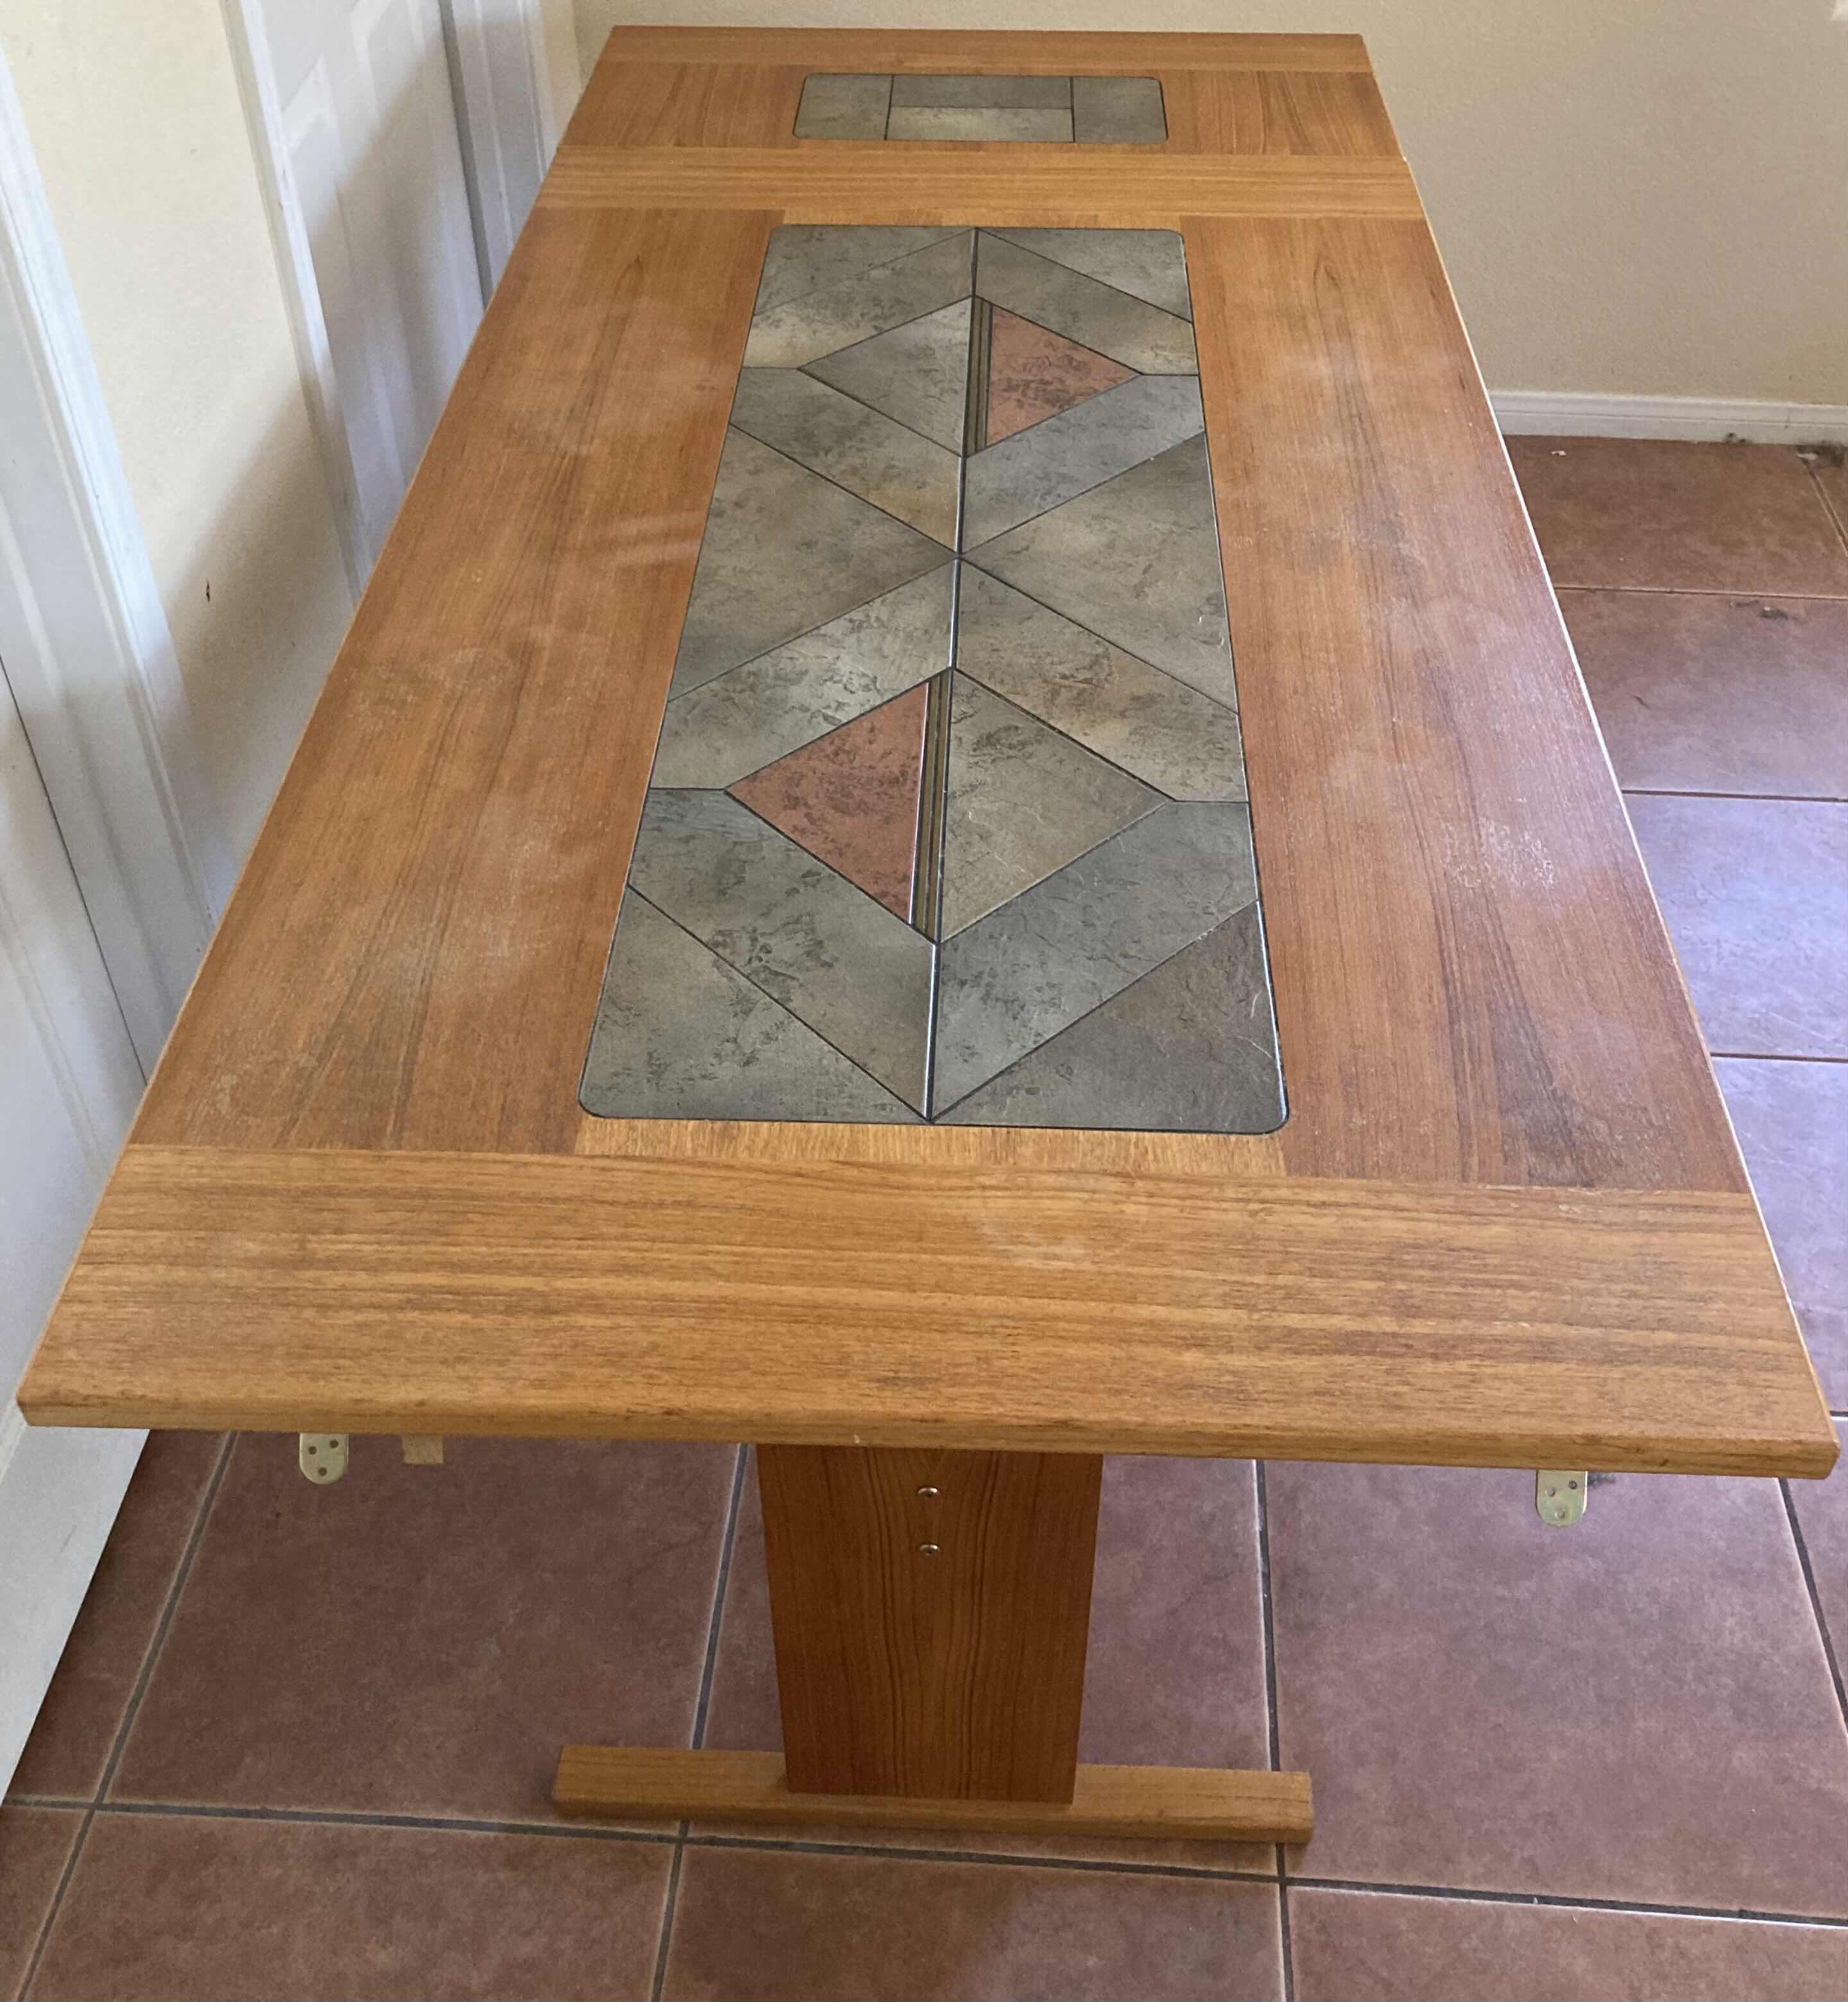 Photo 6 of SOUTHWESTERN STYLE WOOD FINISH DINING TABLE W TILE TOP INLAY 63”-79” X 35.5” H28.5”